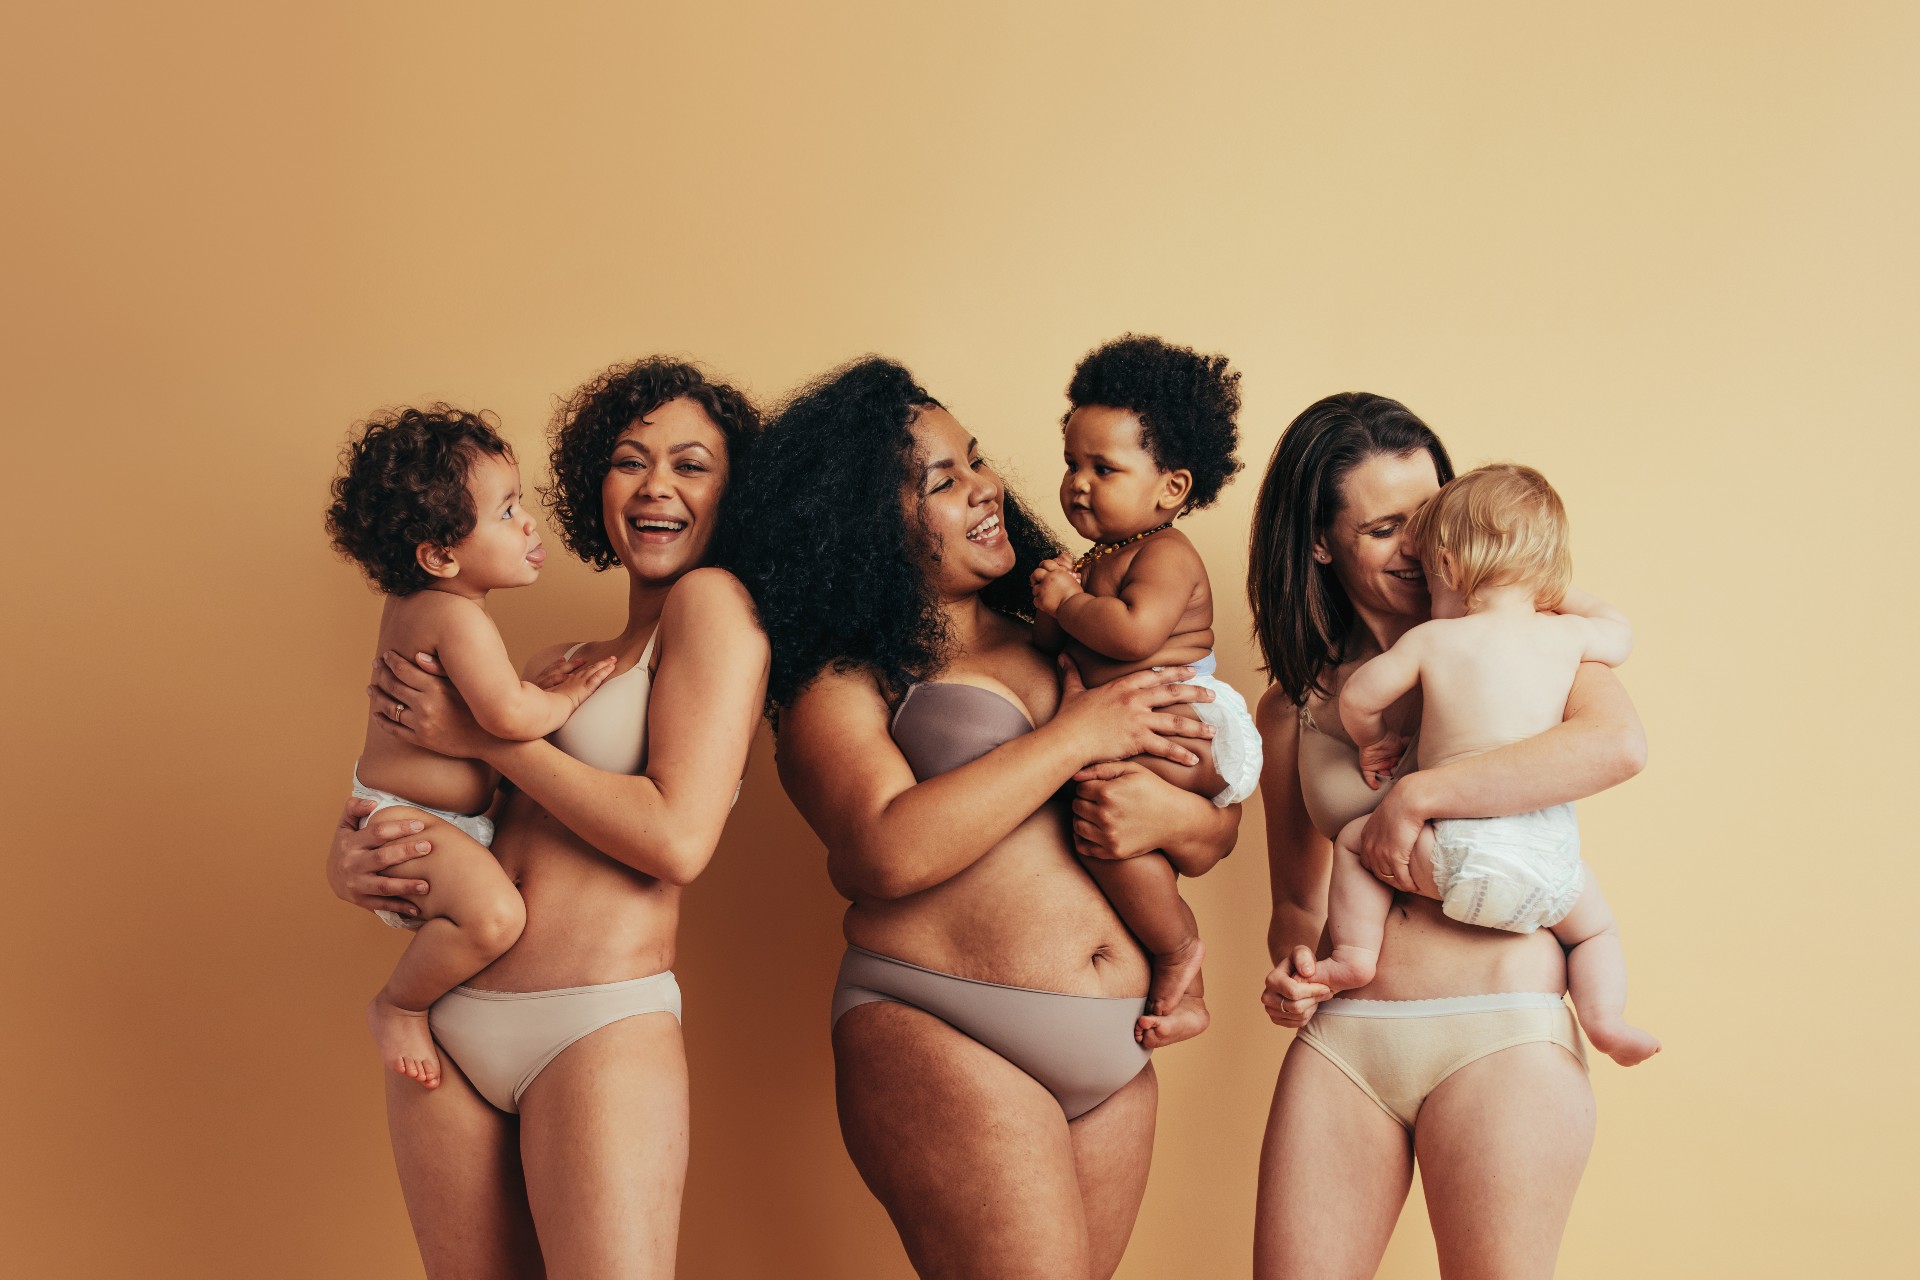 A Guide to Postpartum Shapewear as Told by Real Customers